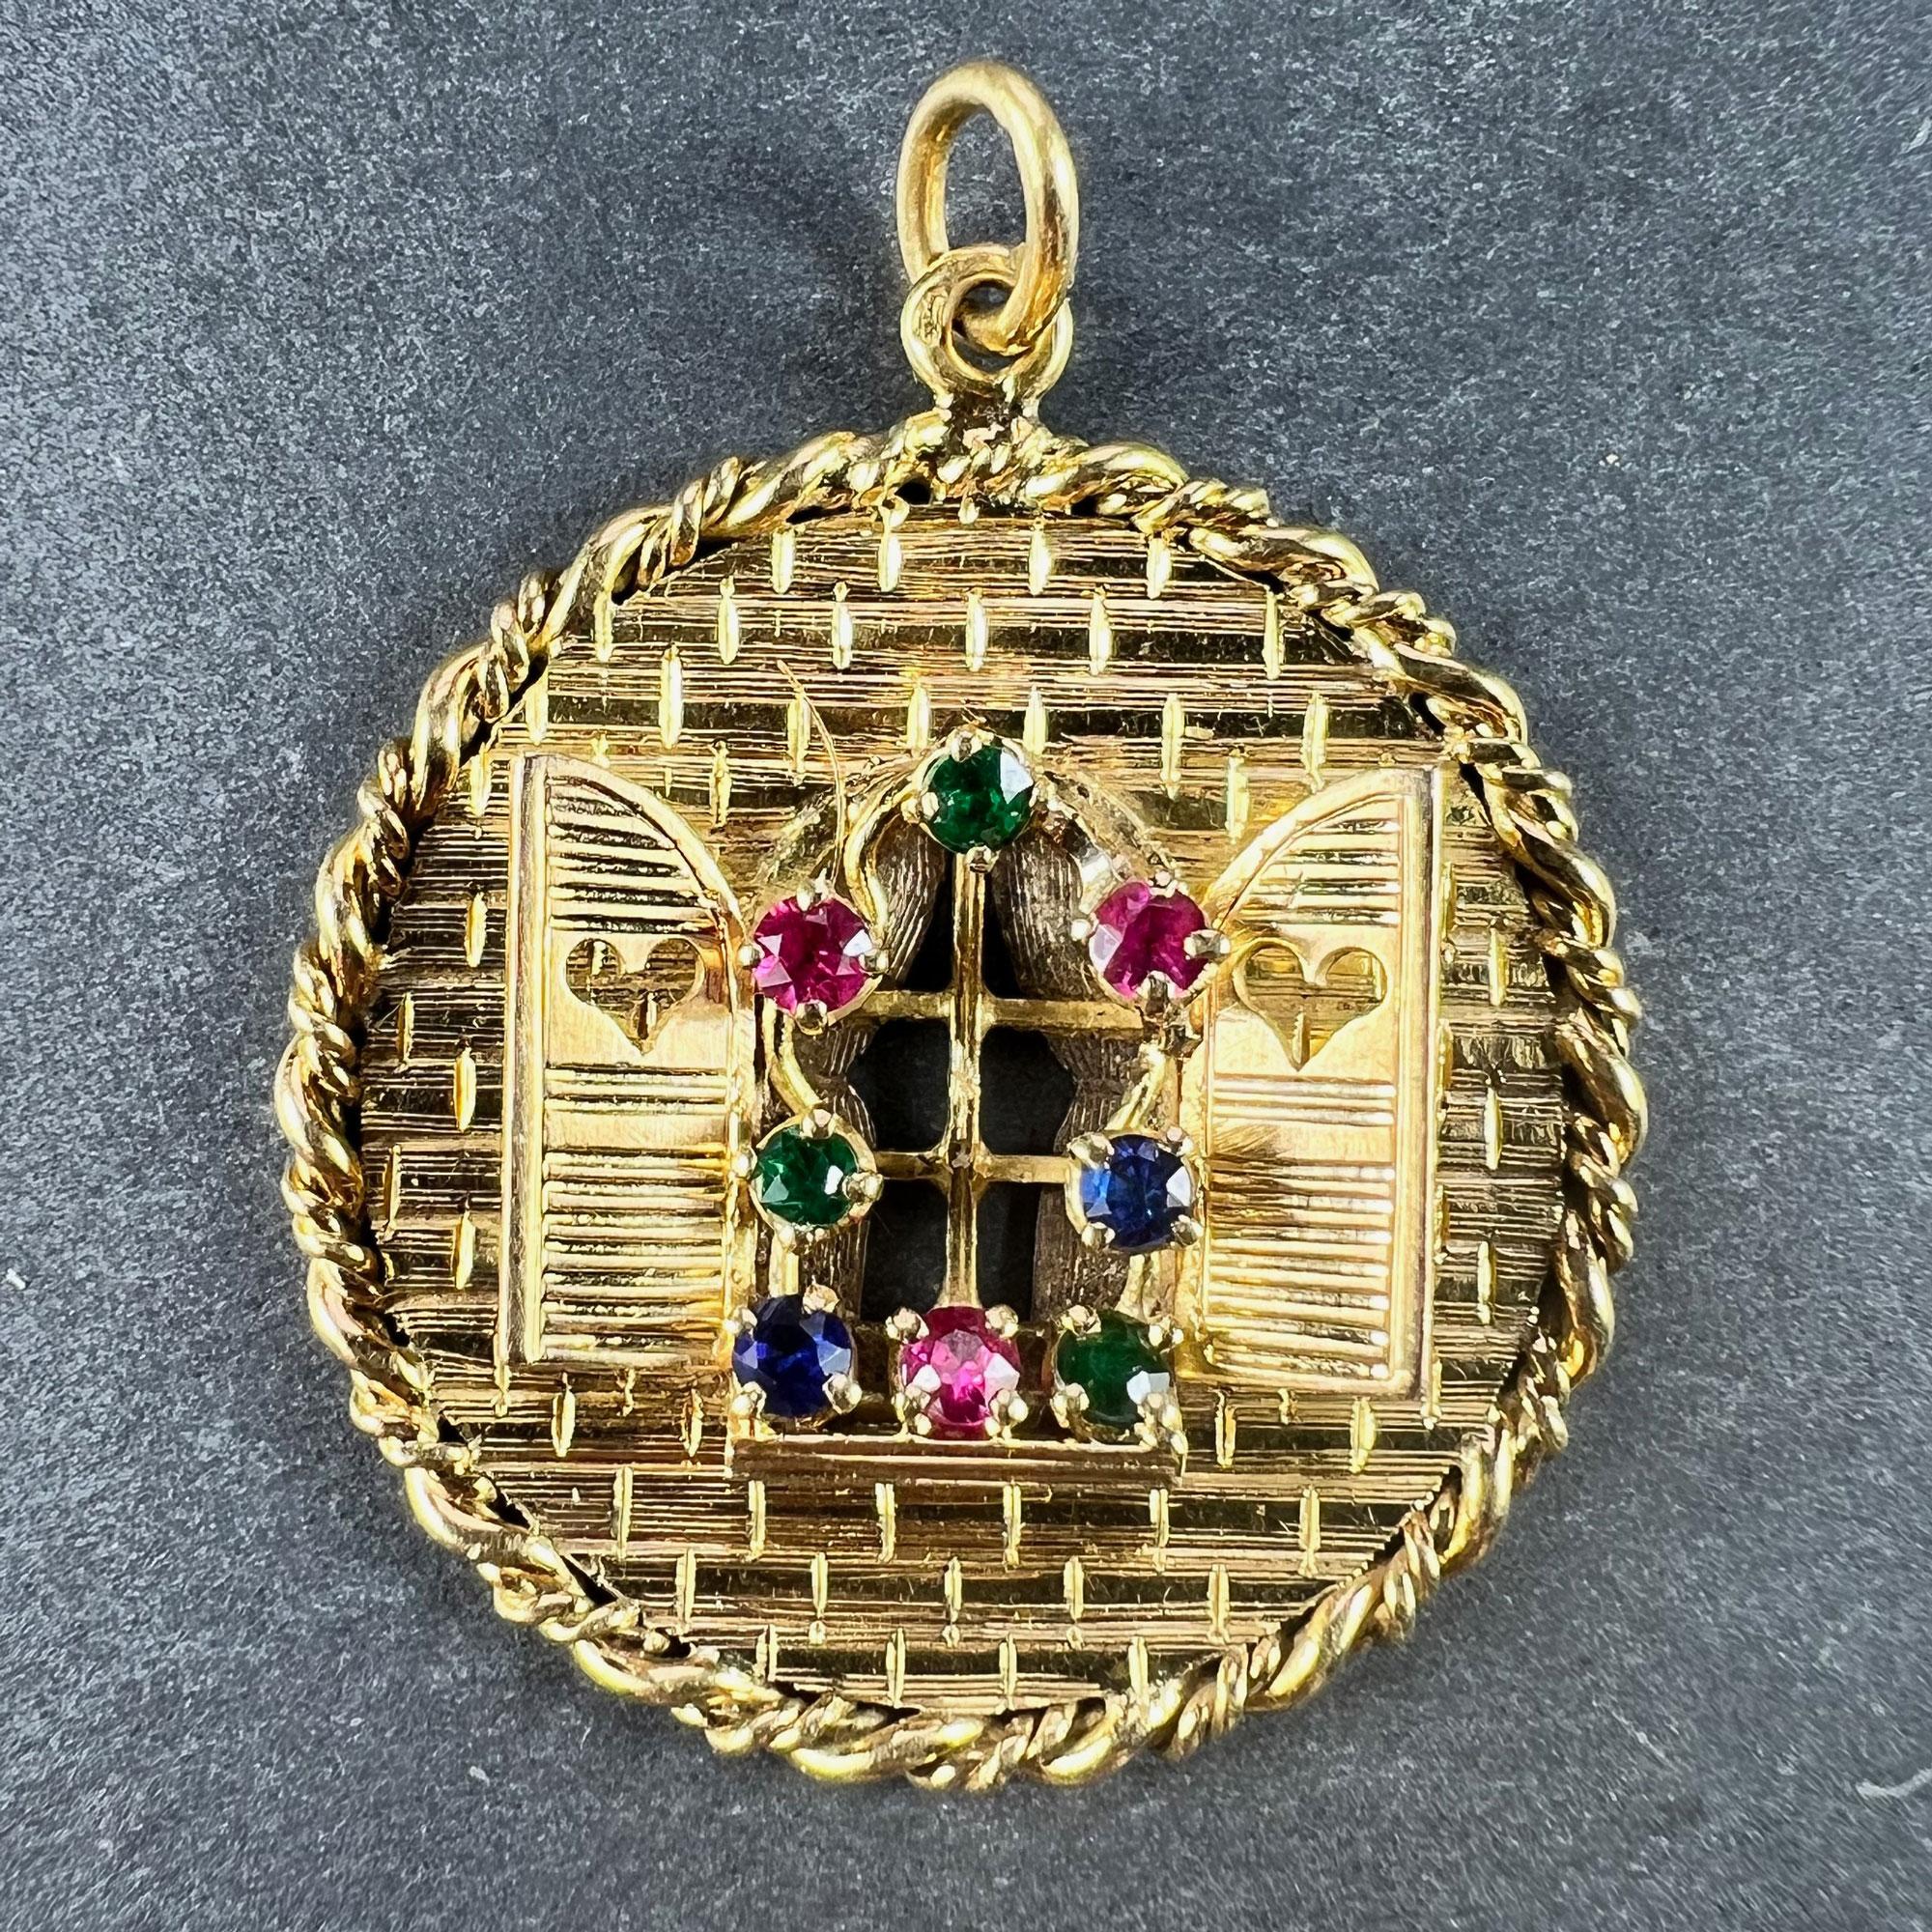 A French 18 karat (18K) yellow gold charm pendant depicting a window in a brick wall with open shutters with pierced love hearts. The windowbox and frame of the window are garlanded with flowers depicted by red, green and blue paste gems. Engraved